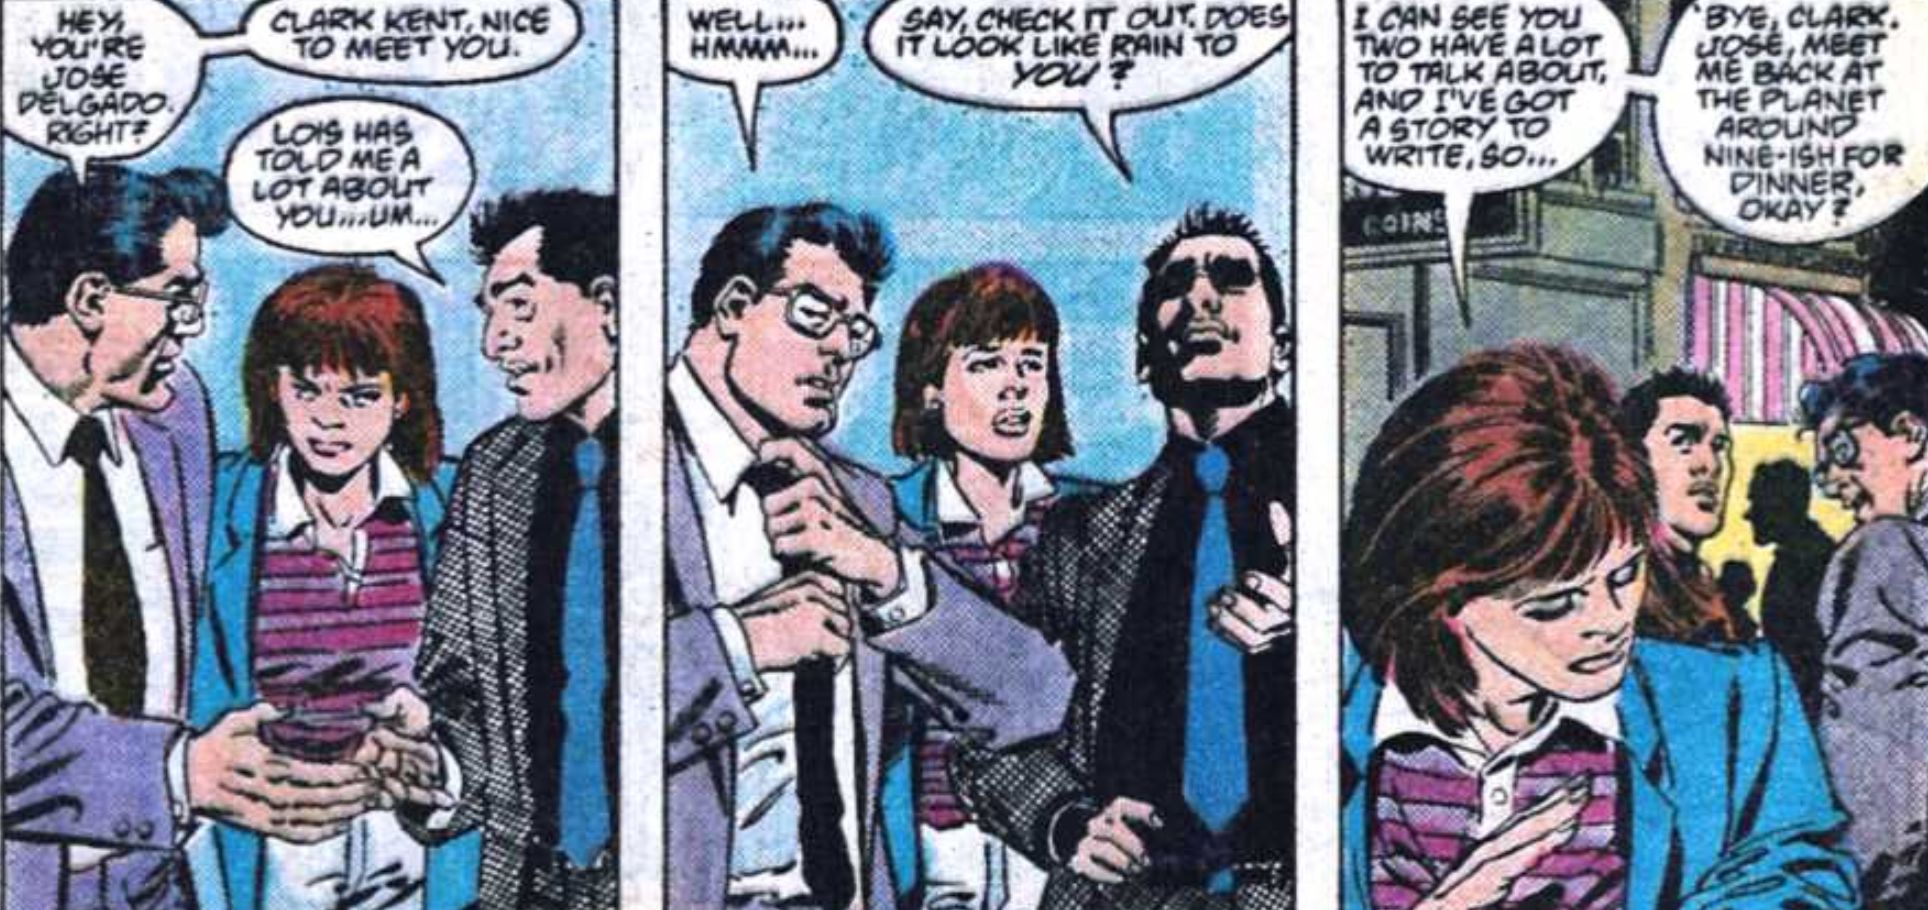 Lois Dates Jose Delgado AKA Gangbuster in The Adventures of Superman Issue 448